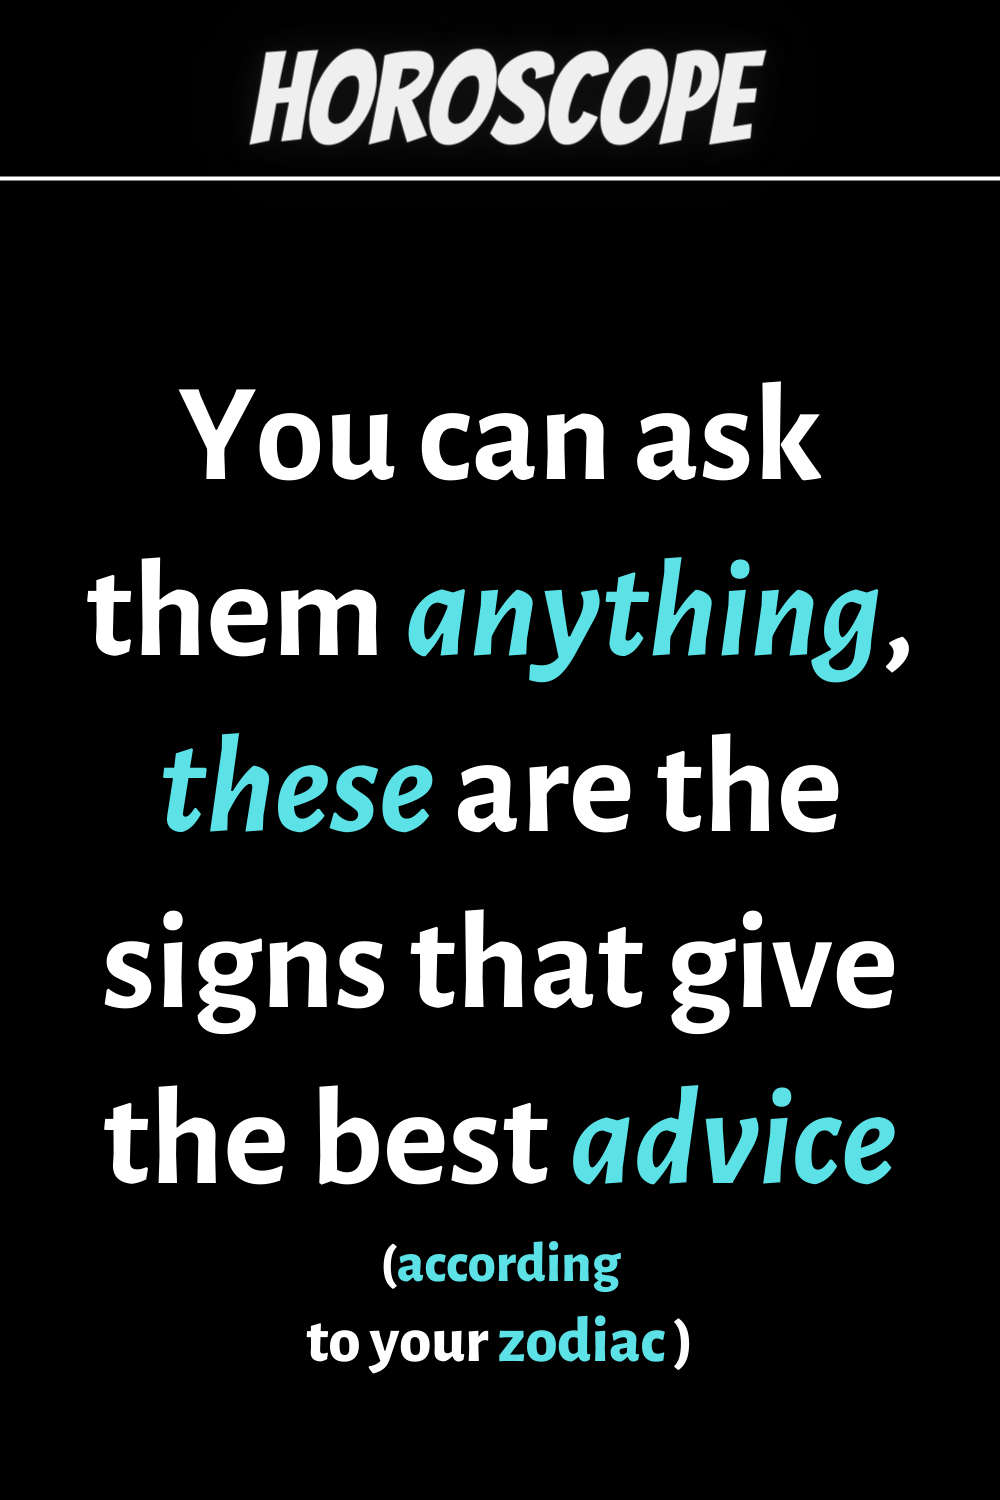 these are the signs that give the best advice